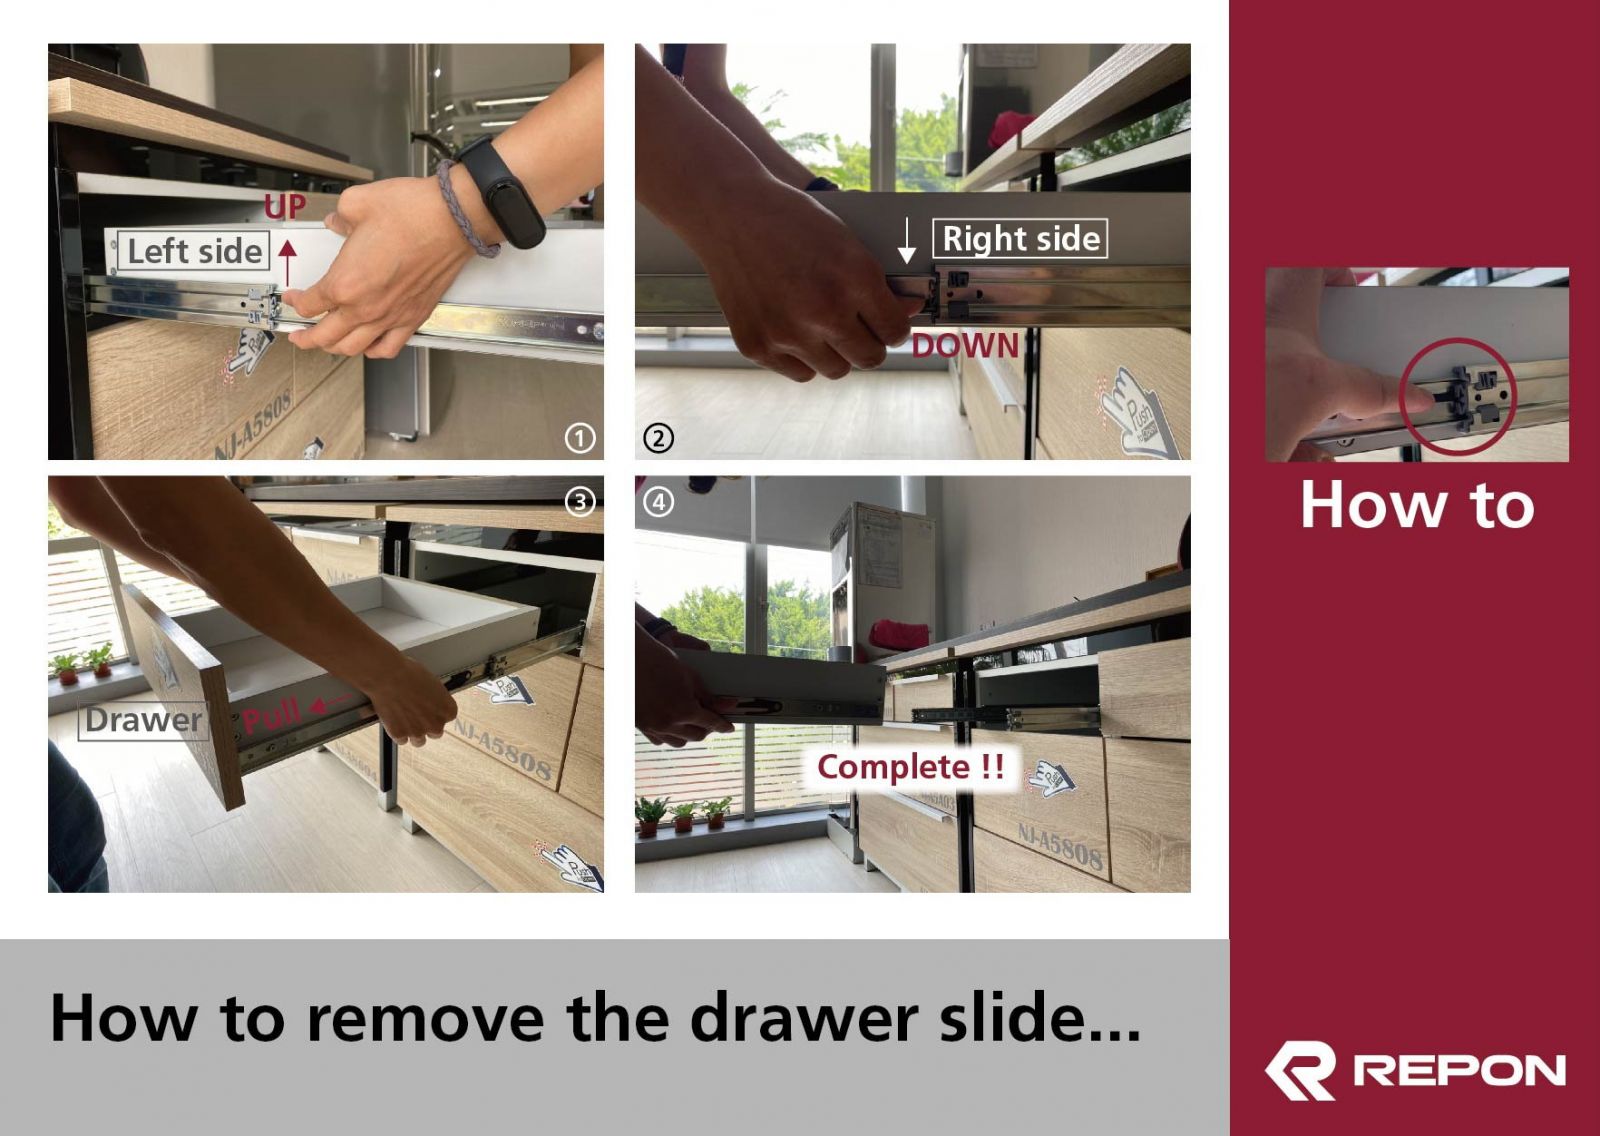 How To Remove Drawers With Side Slides www